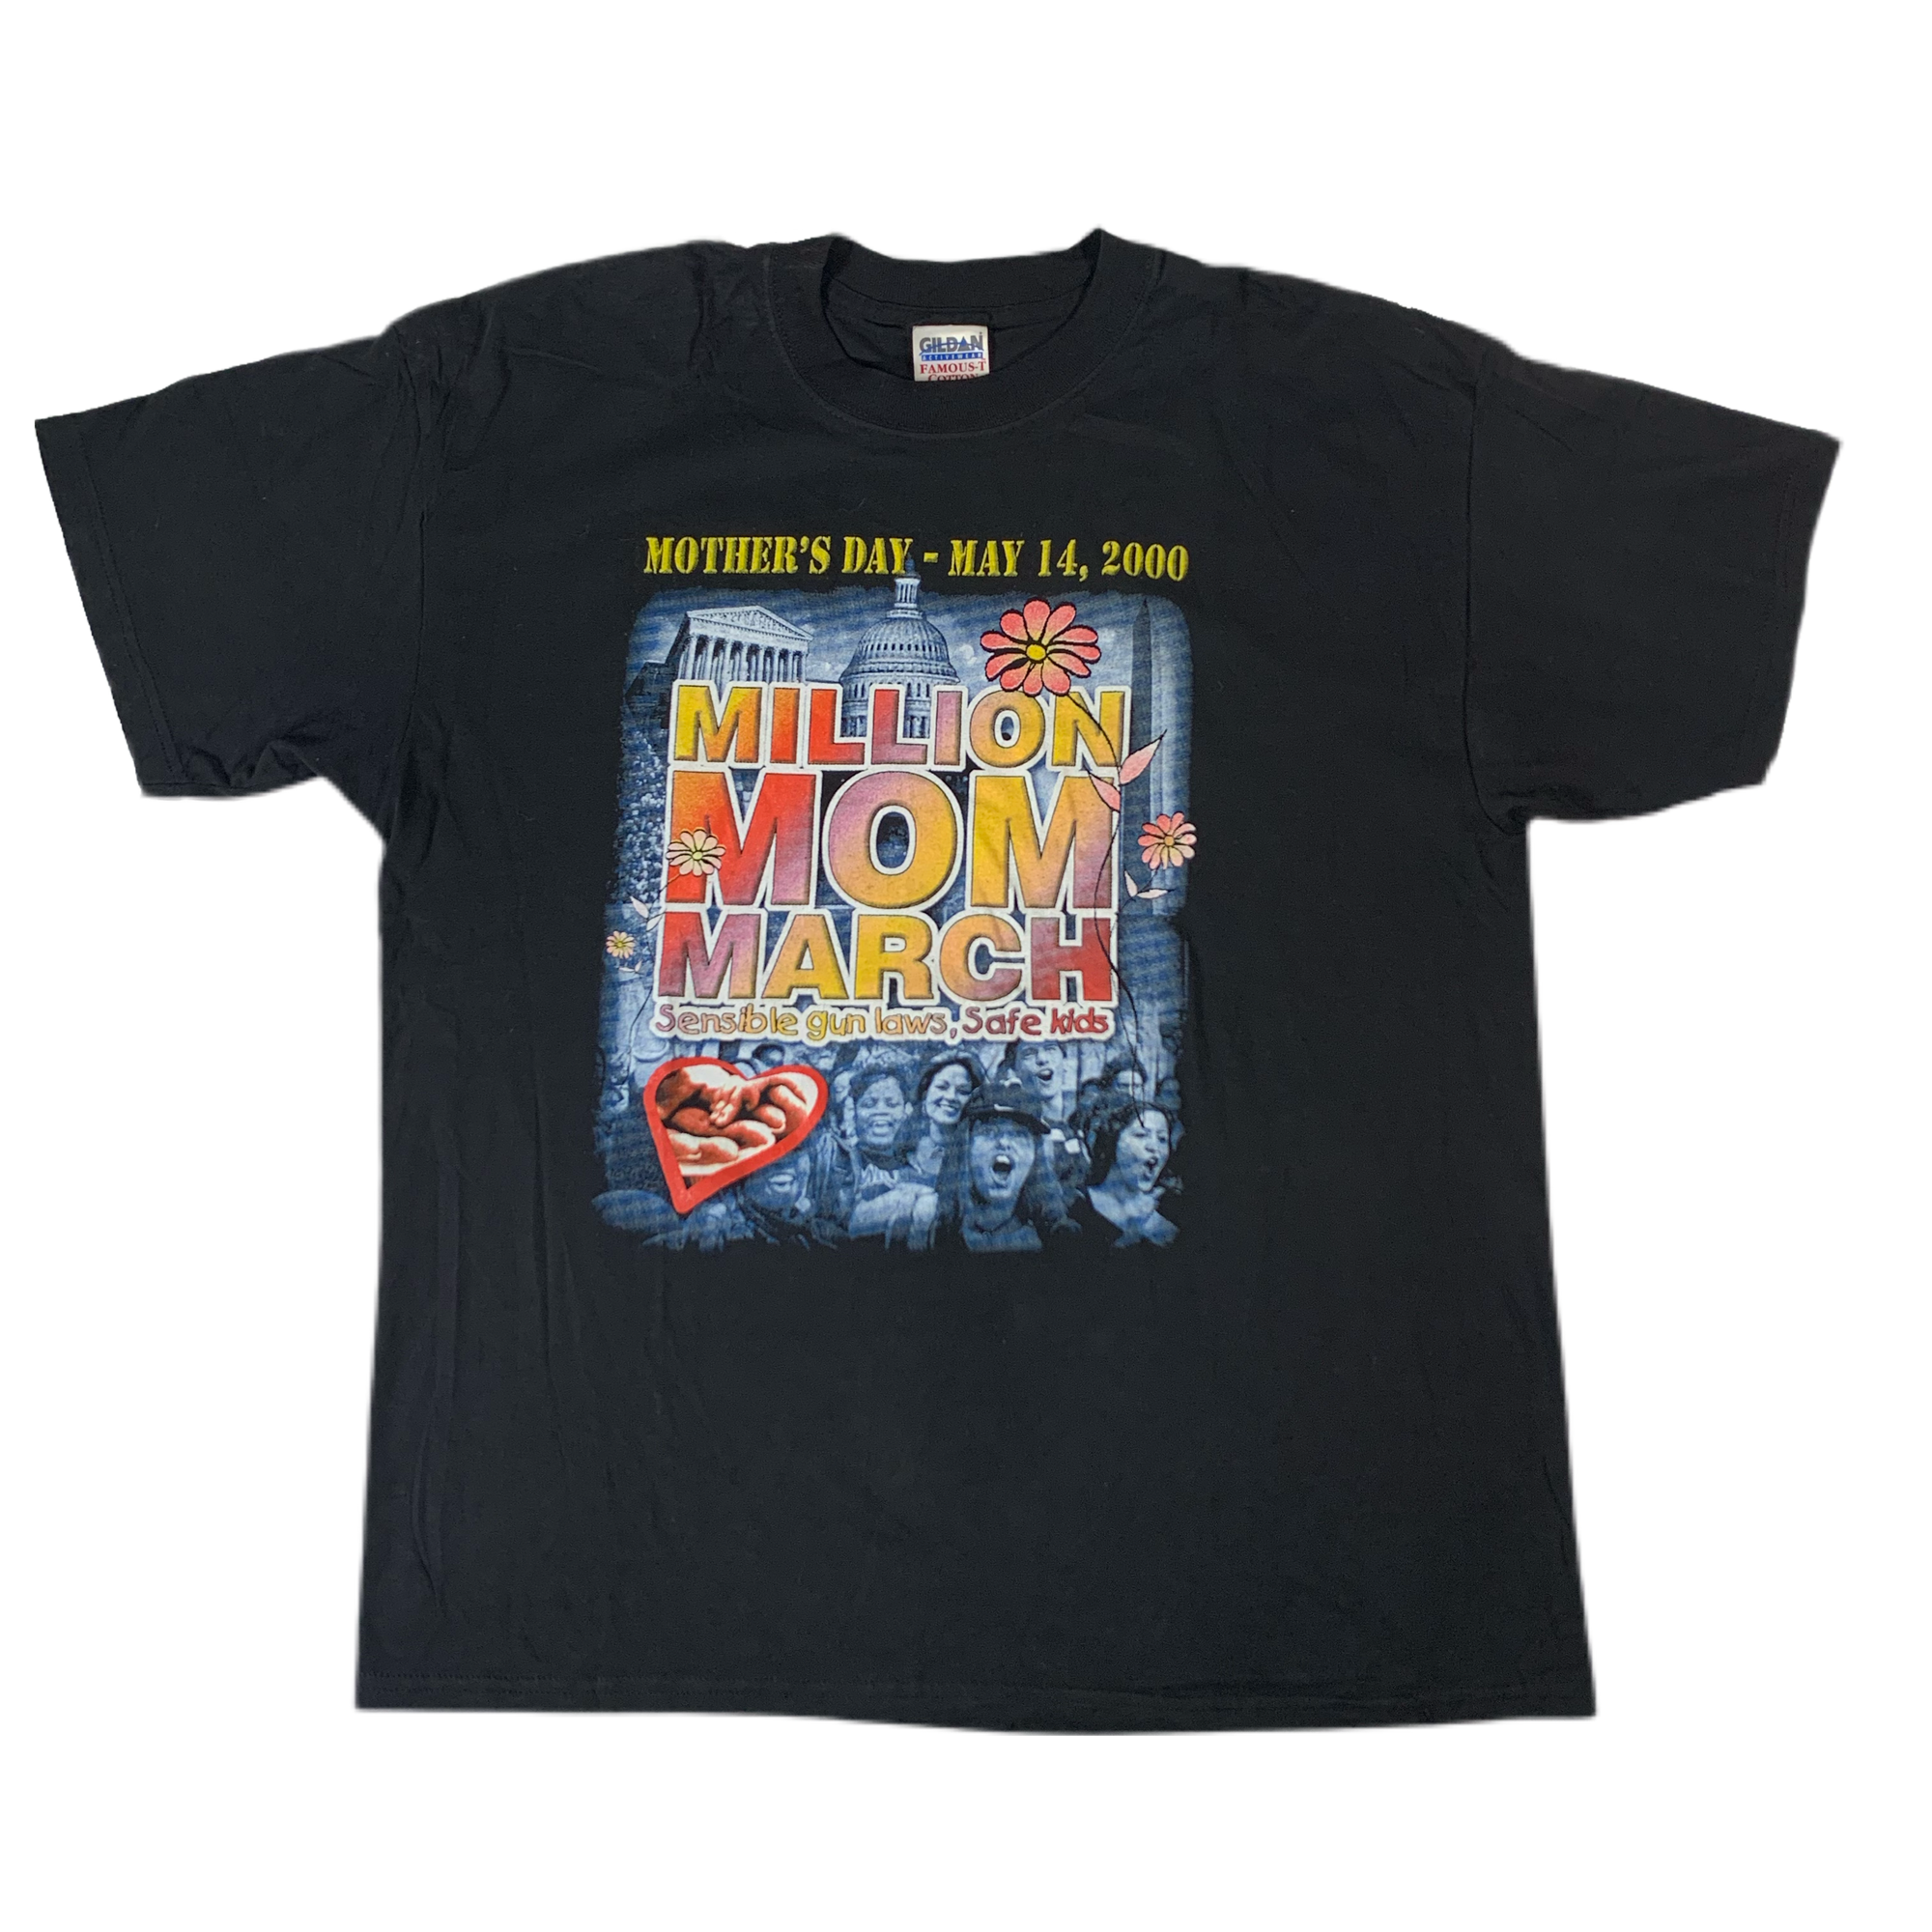 Vintage Million Mom March “Mother’s Day 2000” T-Shirt - jointcustodydc